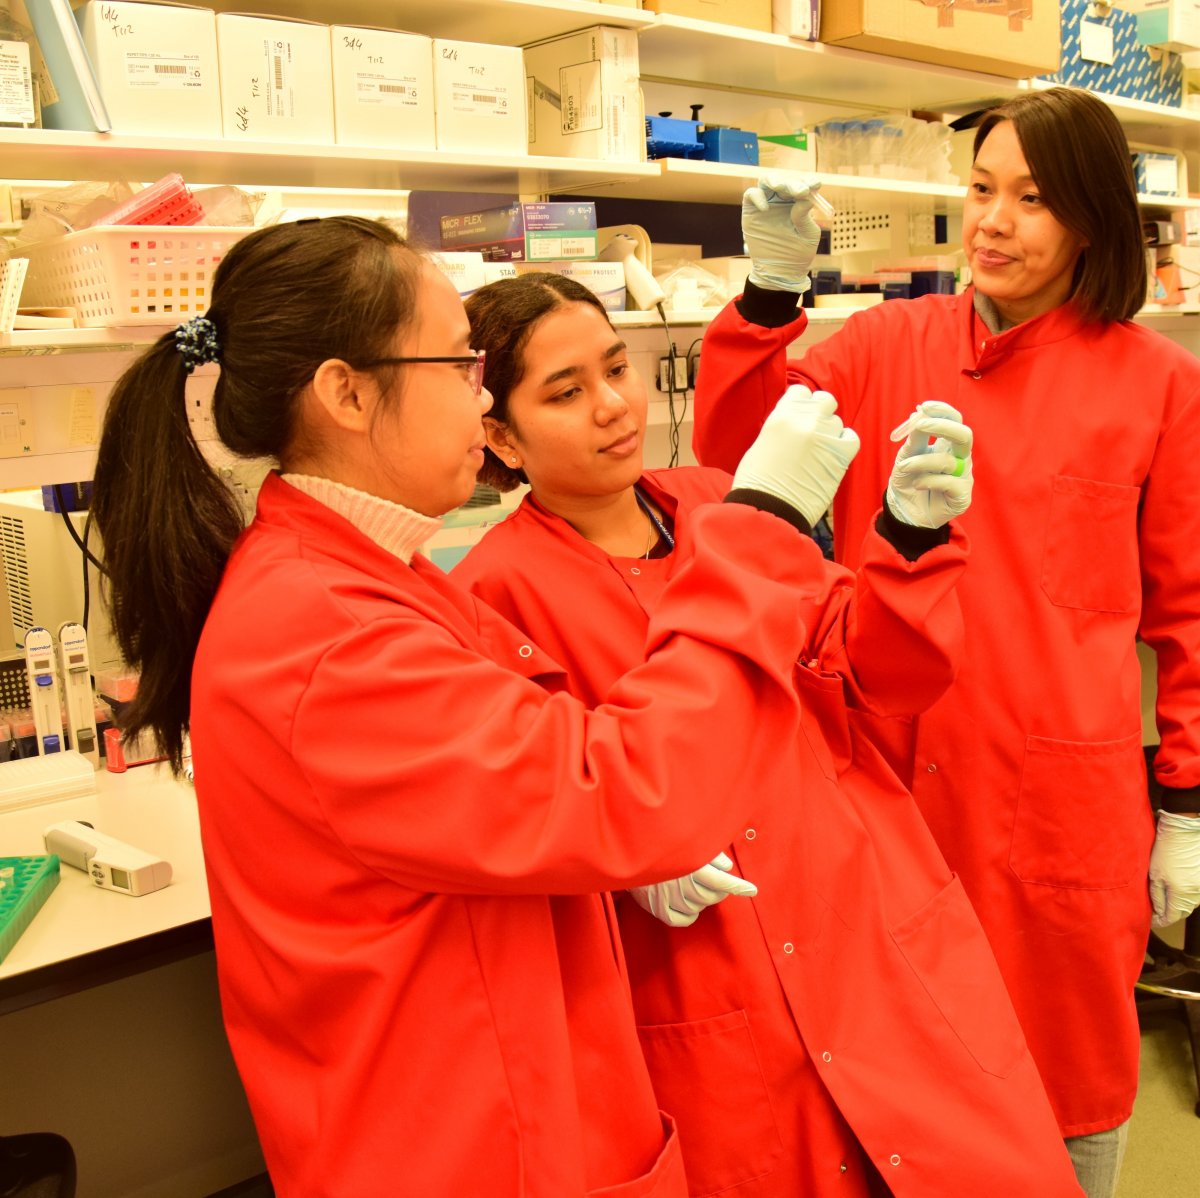 Angela (middle) compares samples with her colleagues Agatha Mia Puspitasari (left) and Willy Augustine (right).